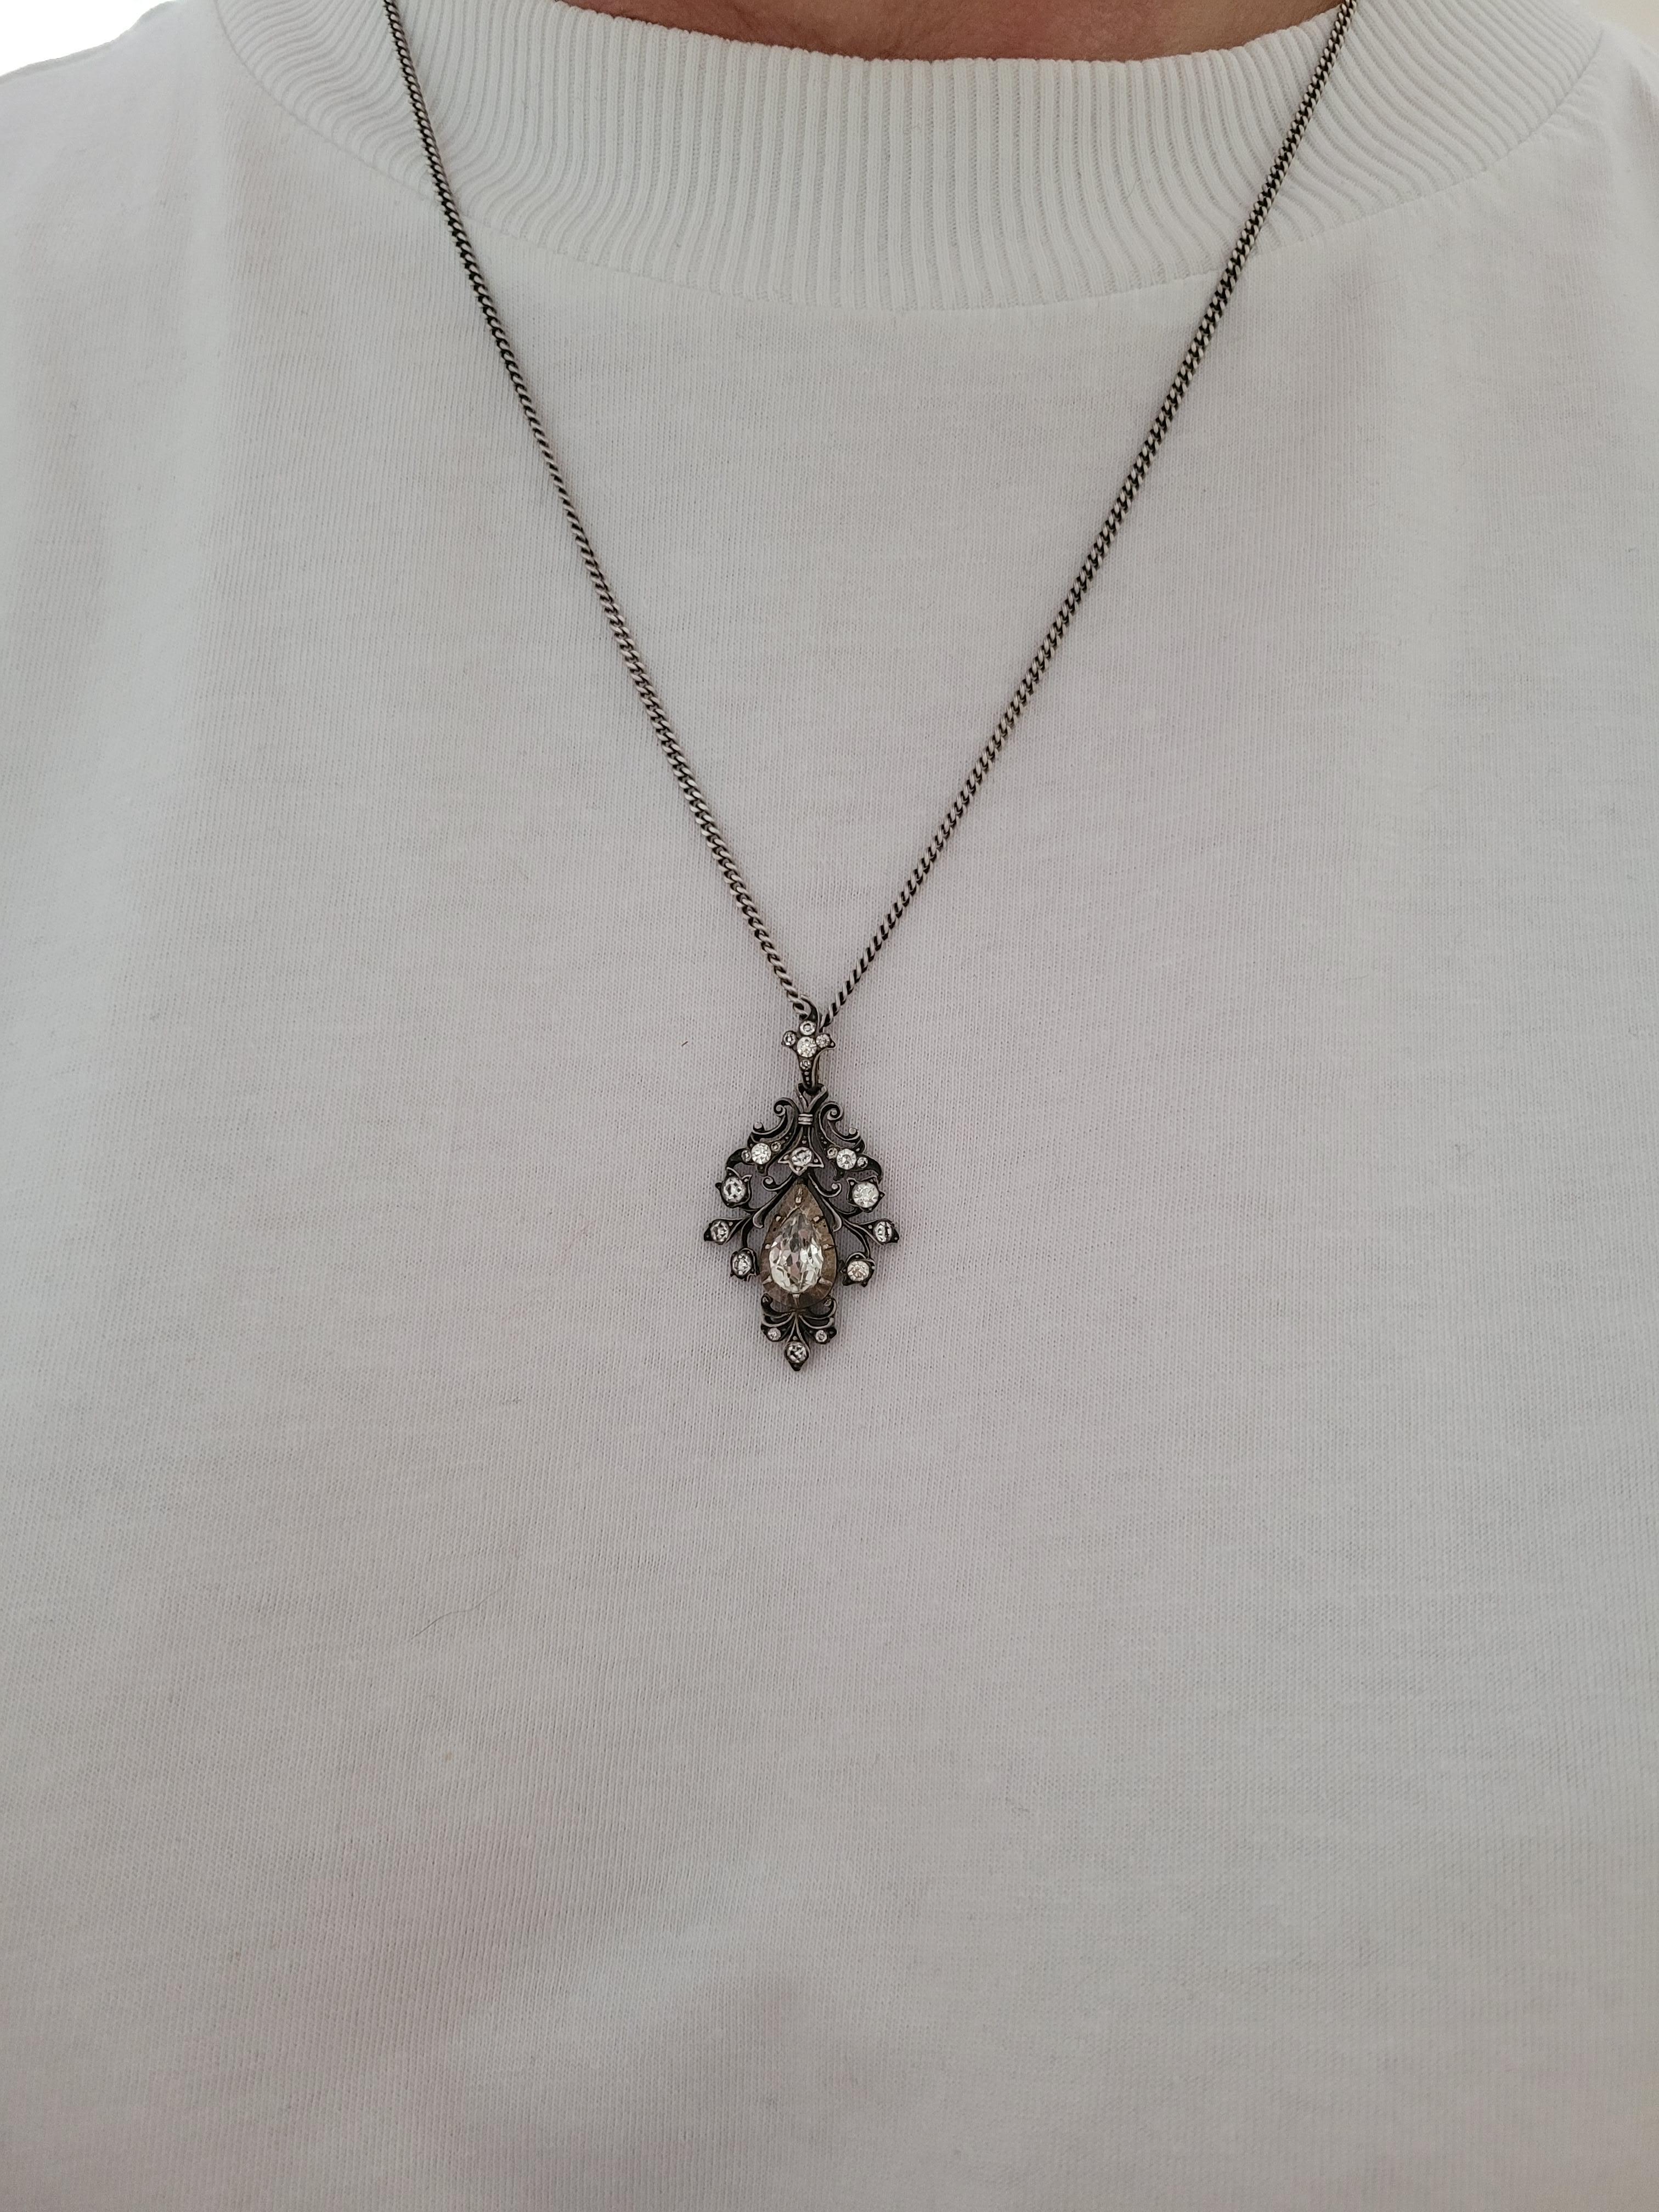 Antique Silver Paste Drop pendant necklace In Good Condition For Sale In Boston, Lincolnshire